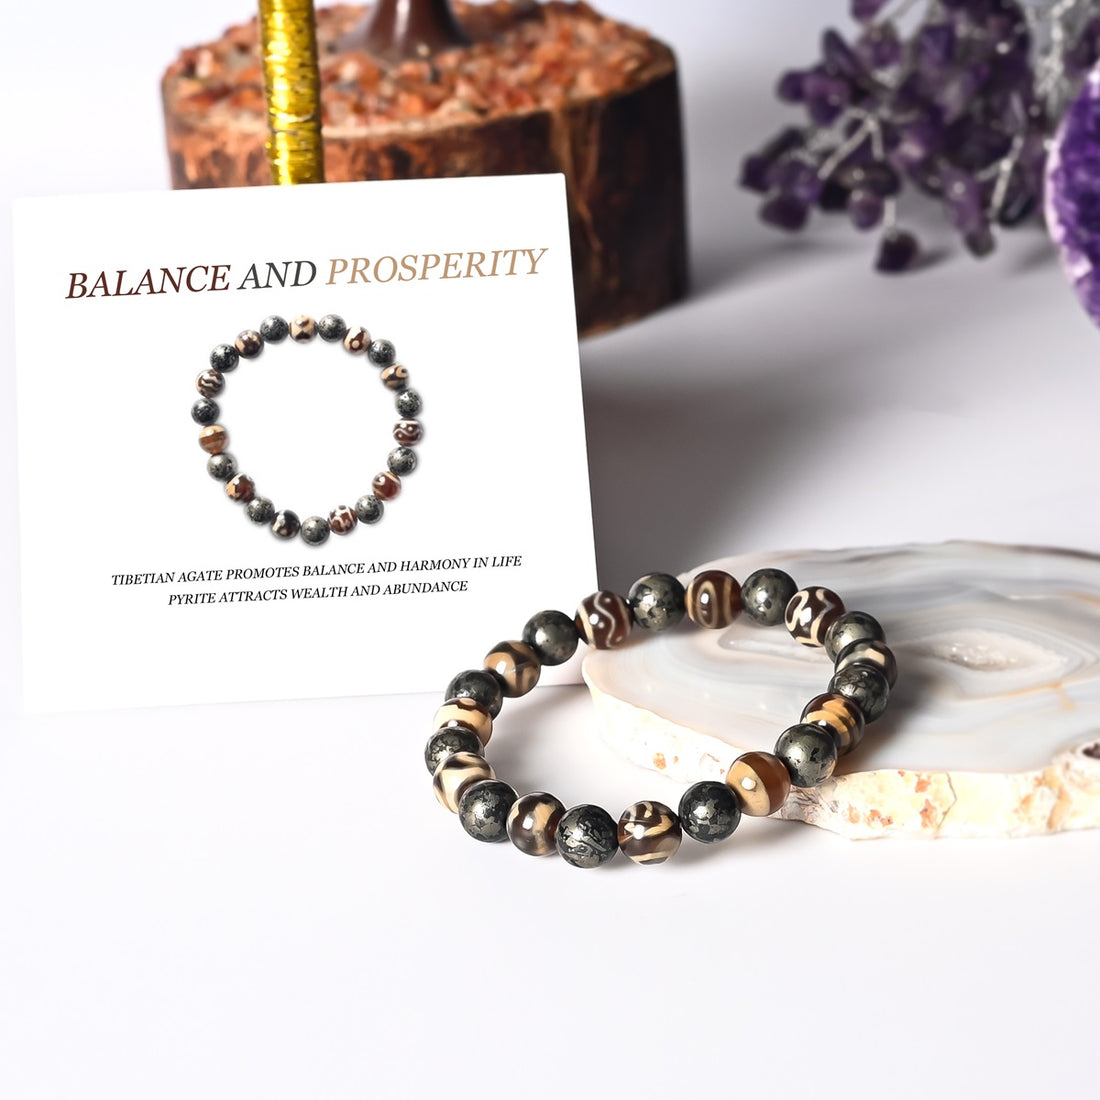 DZI Agate & Pyrite Harmony Bracelet with 8mm beads for balance, prosperity, and protection